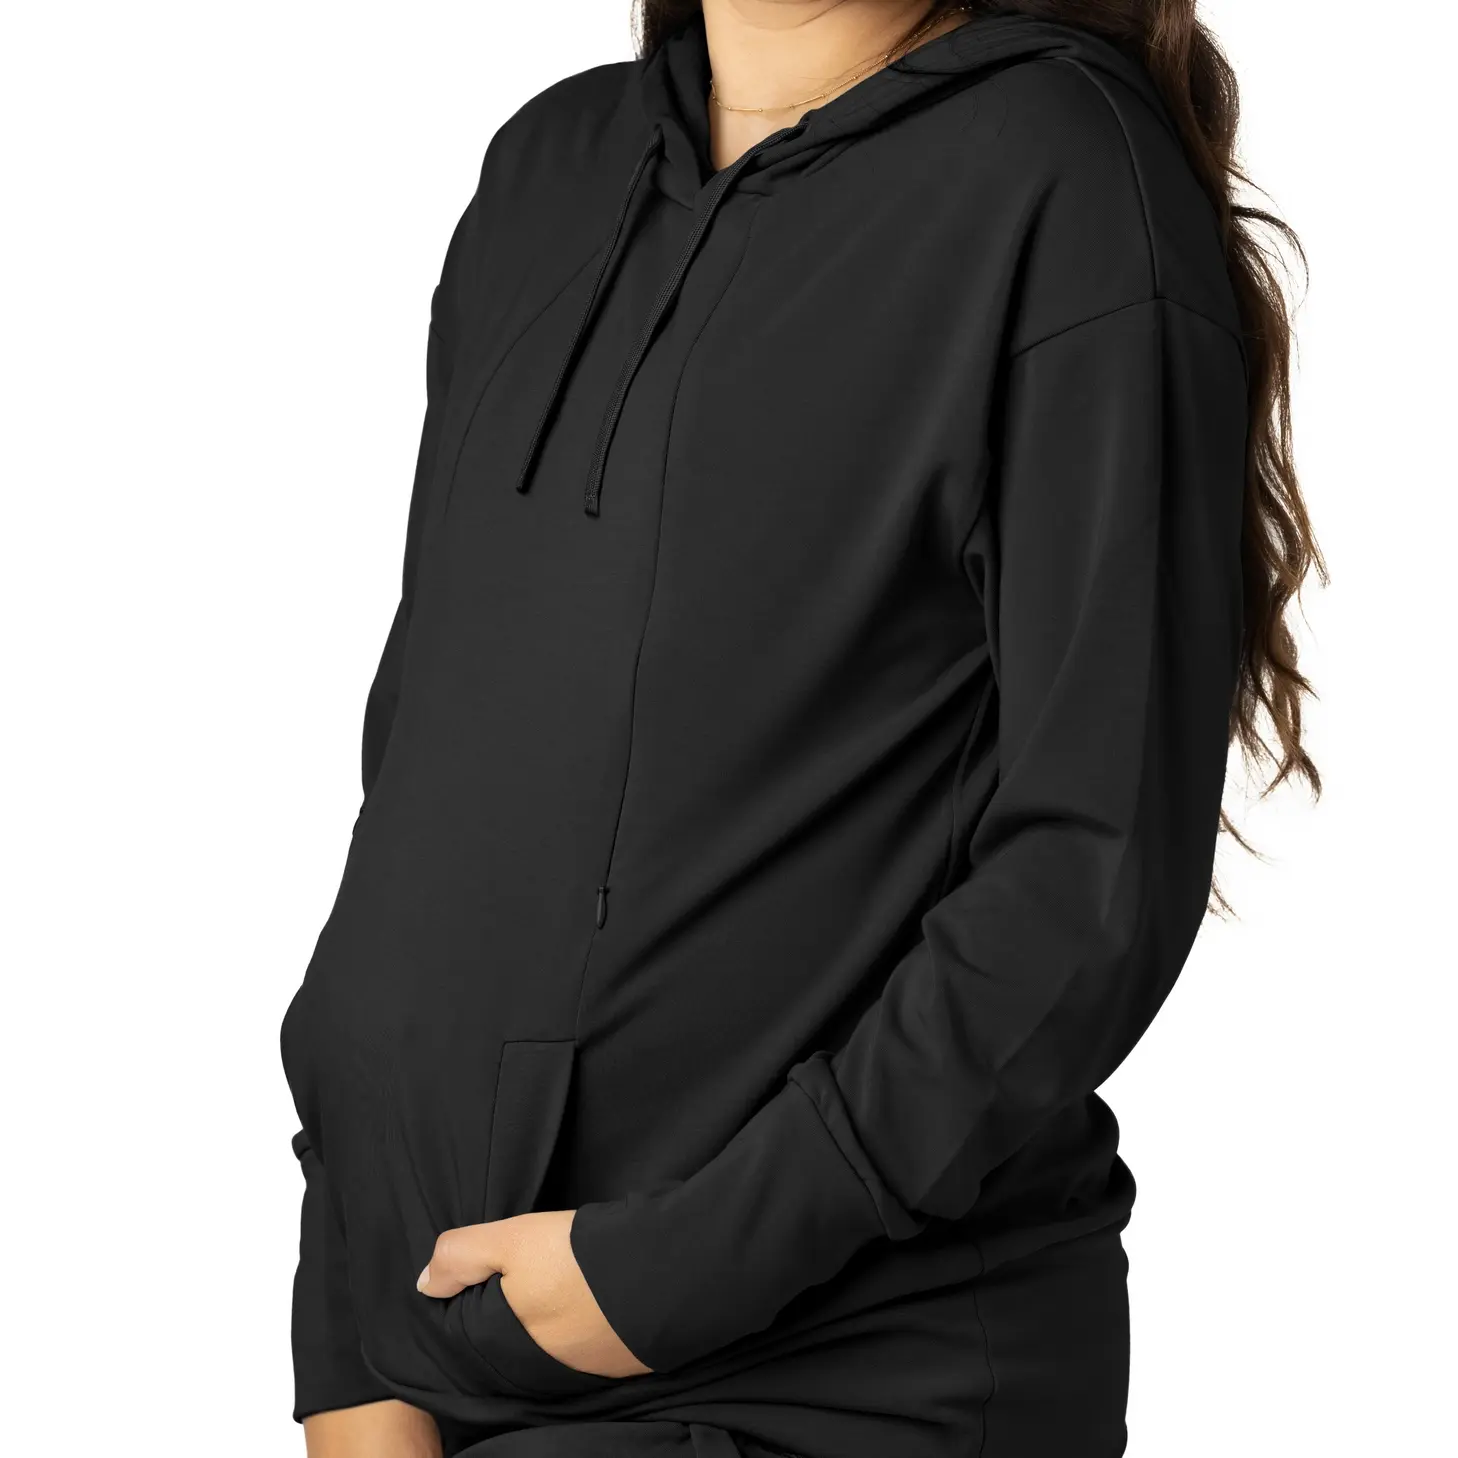 Do you have a bamboo nursing hoodie from Kindred Bravely? Find out